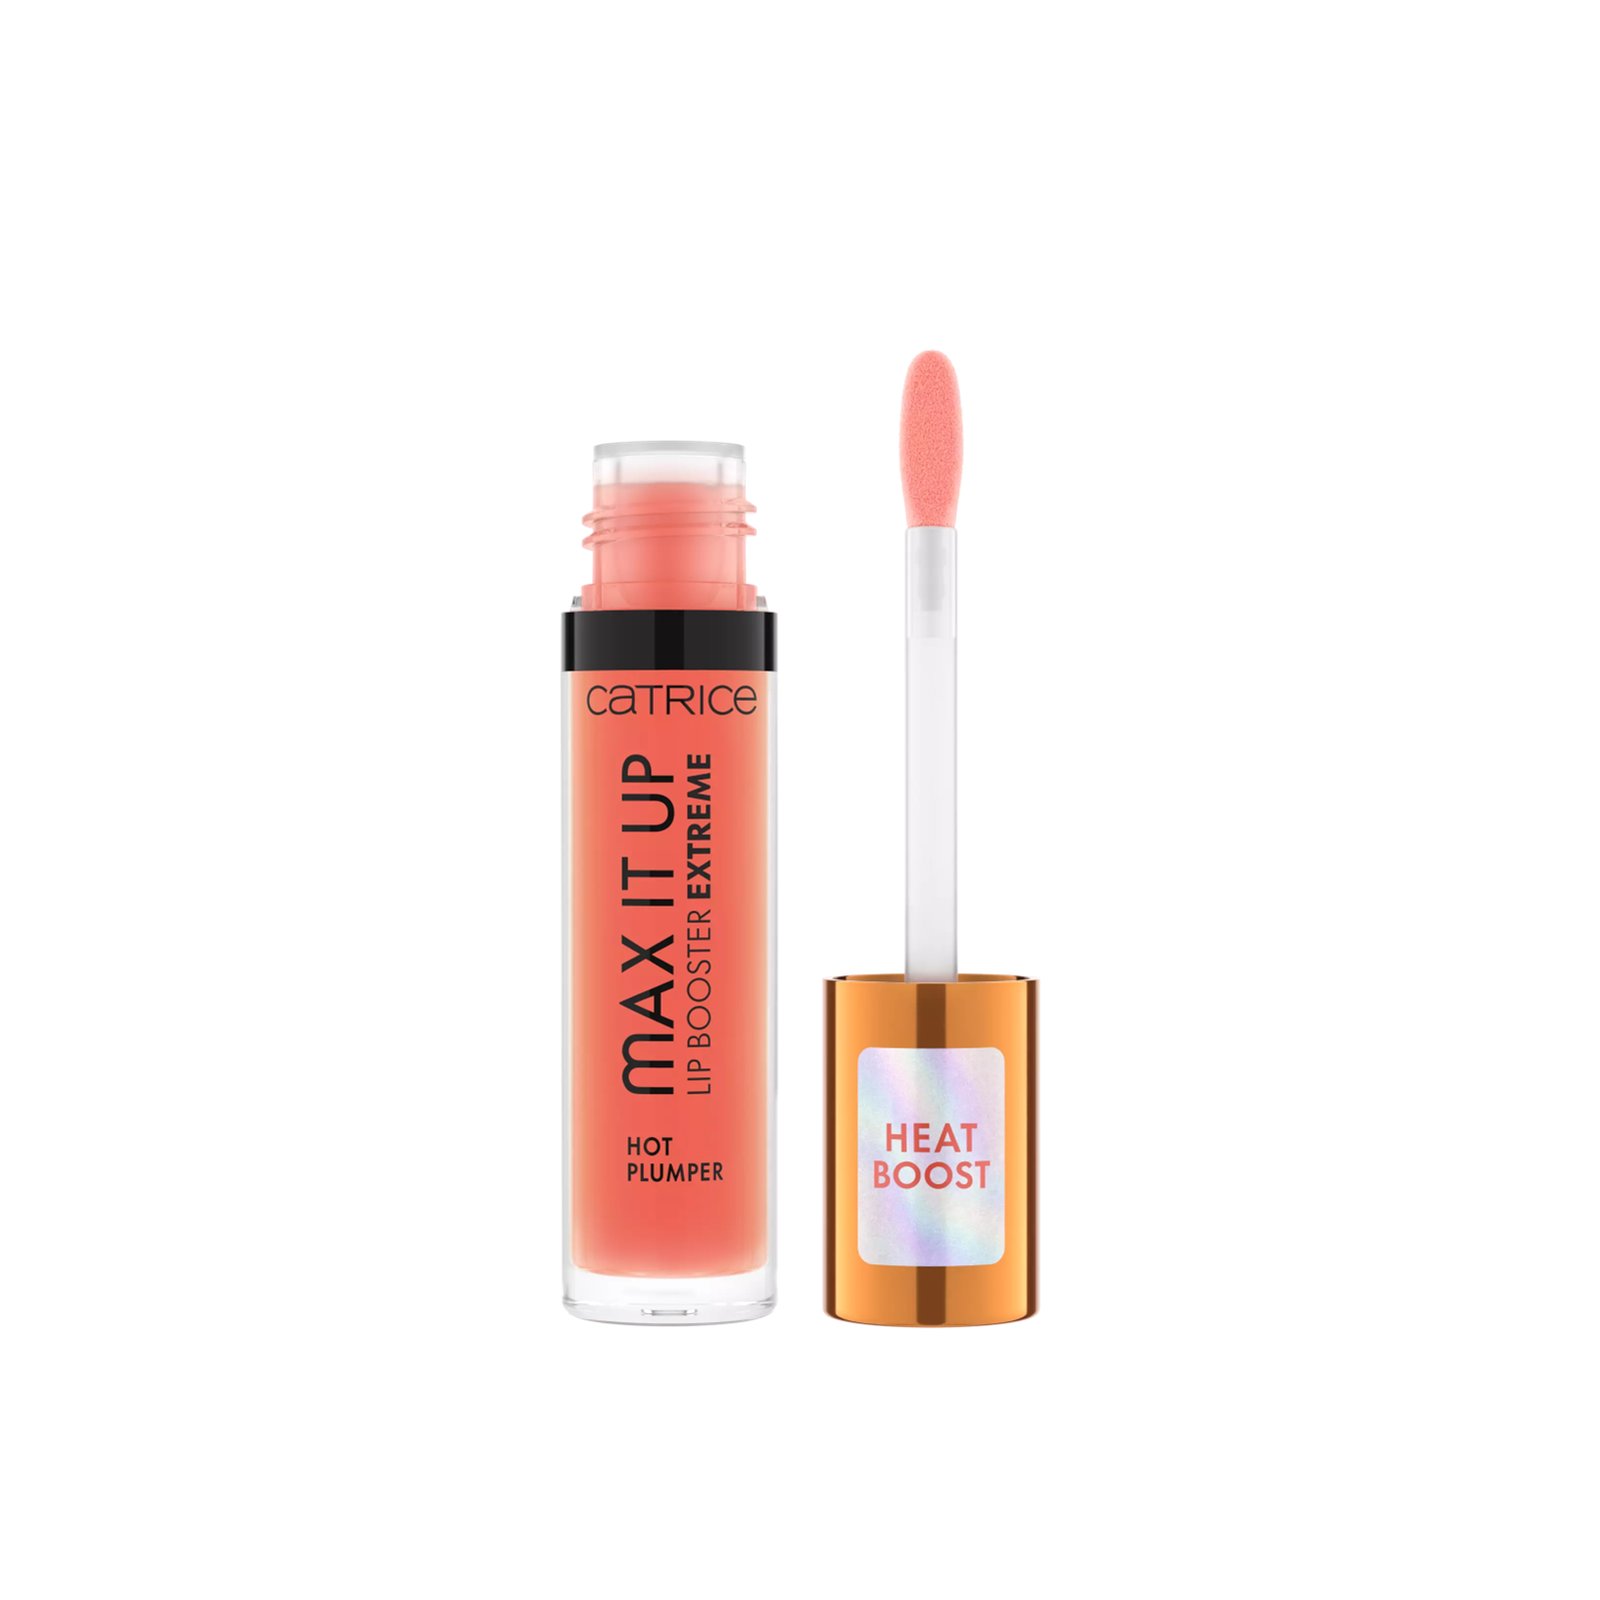 Catrice Max It Up Lip Booster Extreme 020 Pssst...I'm Hot 4ml (0.13 fl oz)